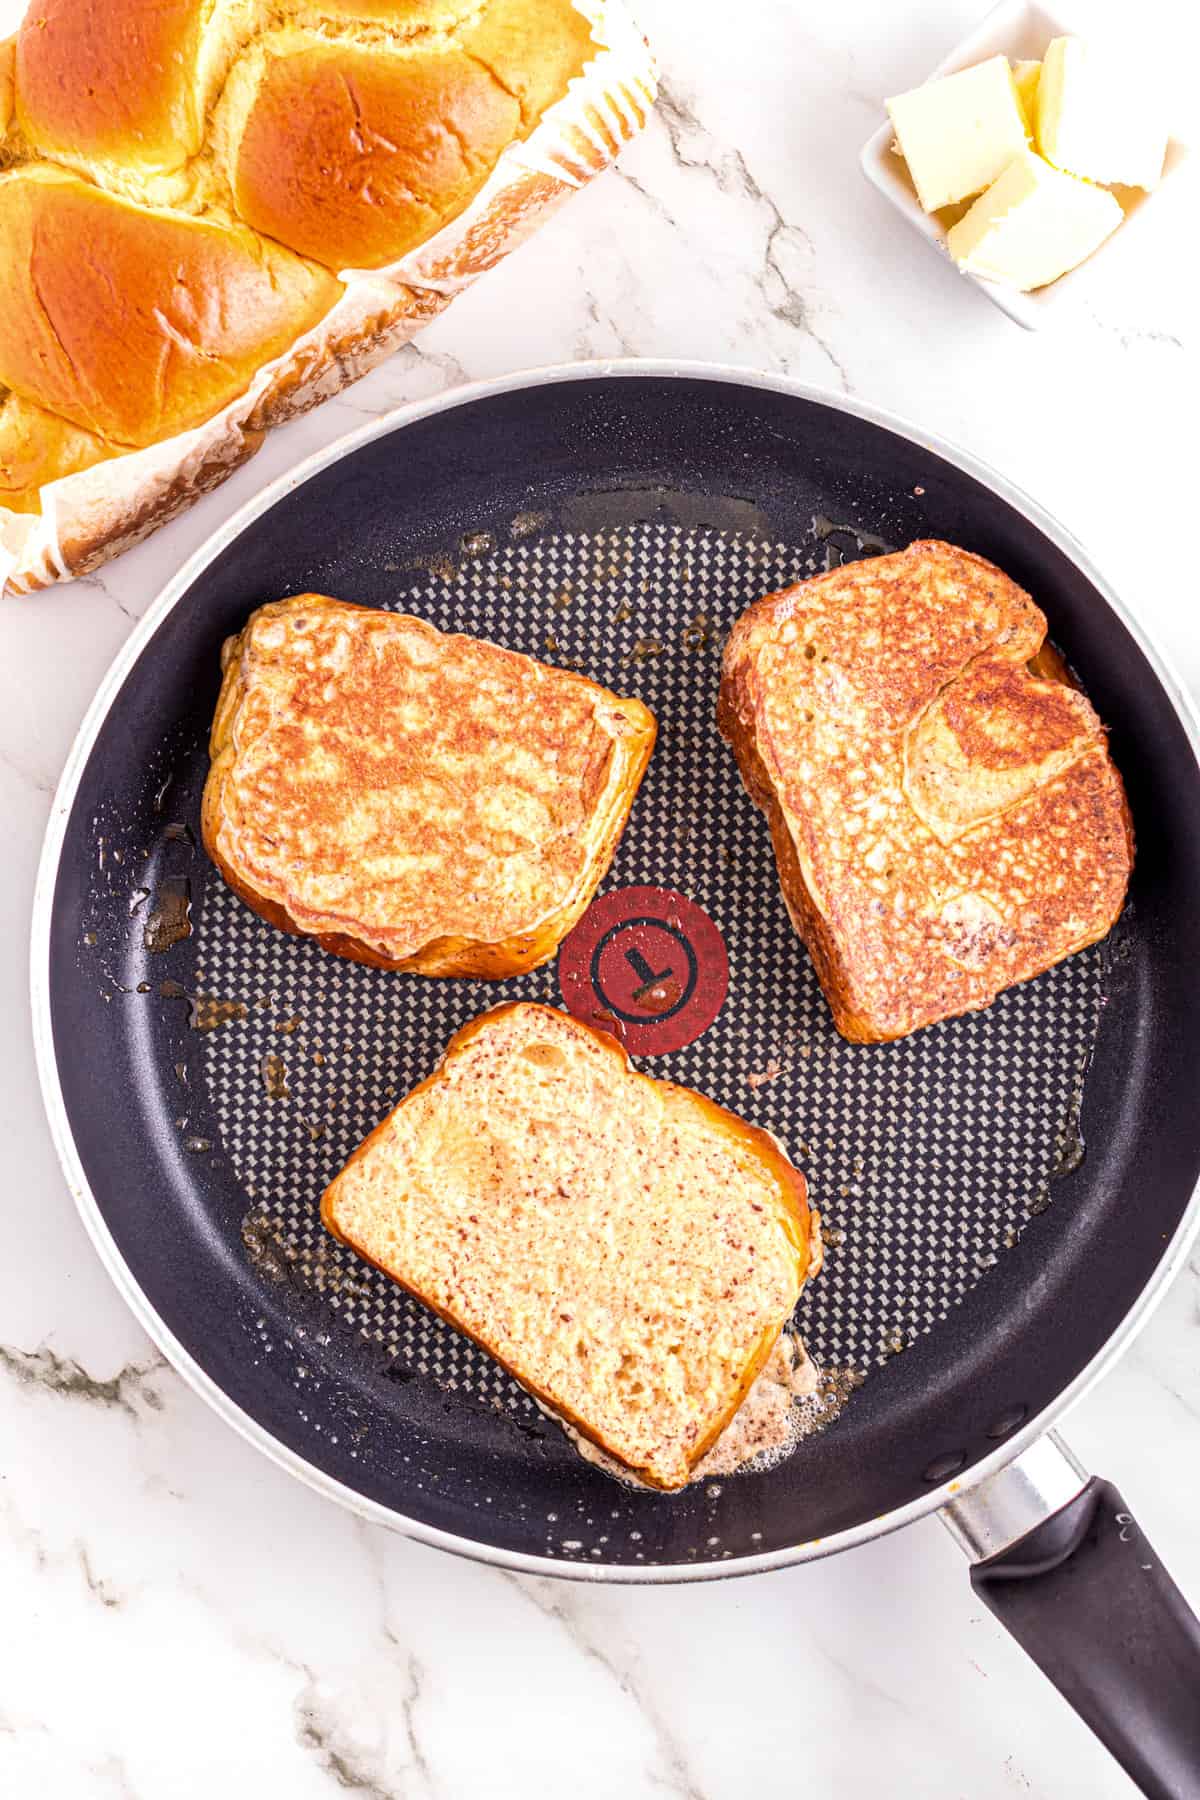 Skillet with Brioche French Toast in it